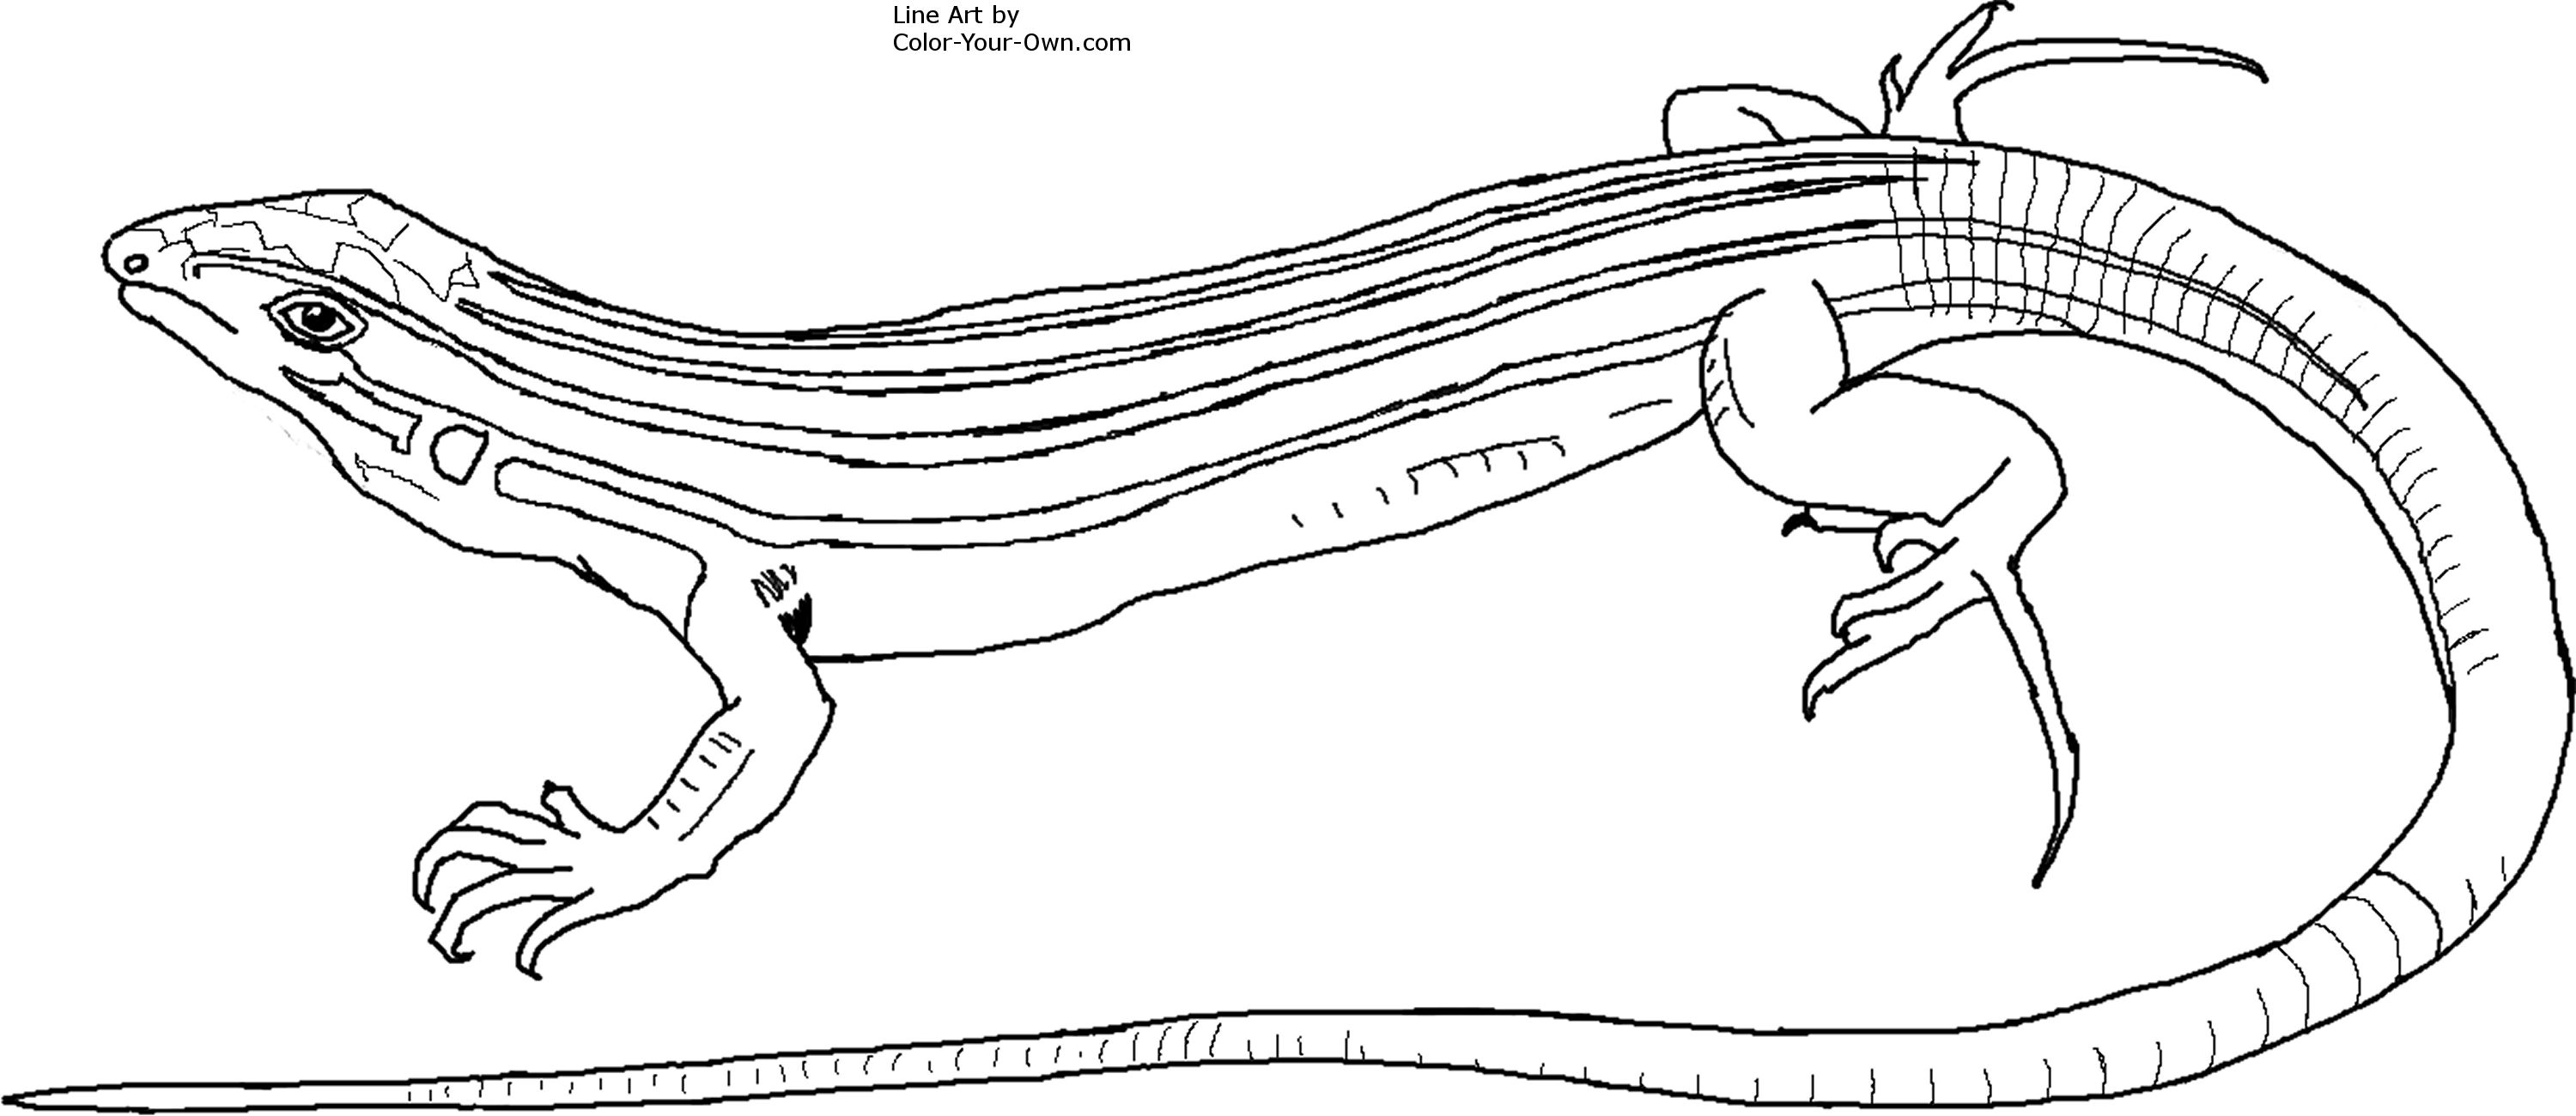 Download 13 lizard coloring pages printable - Print Color Craft